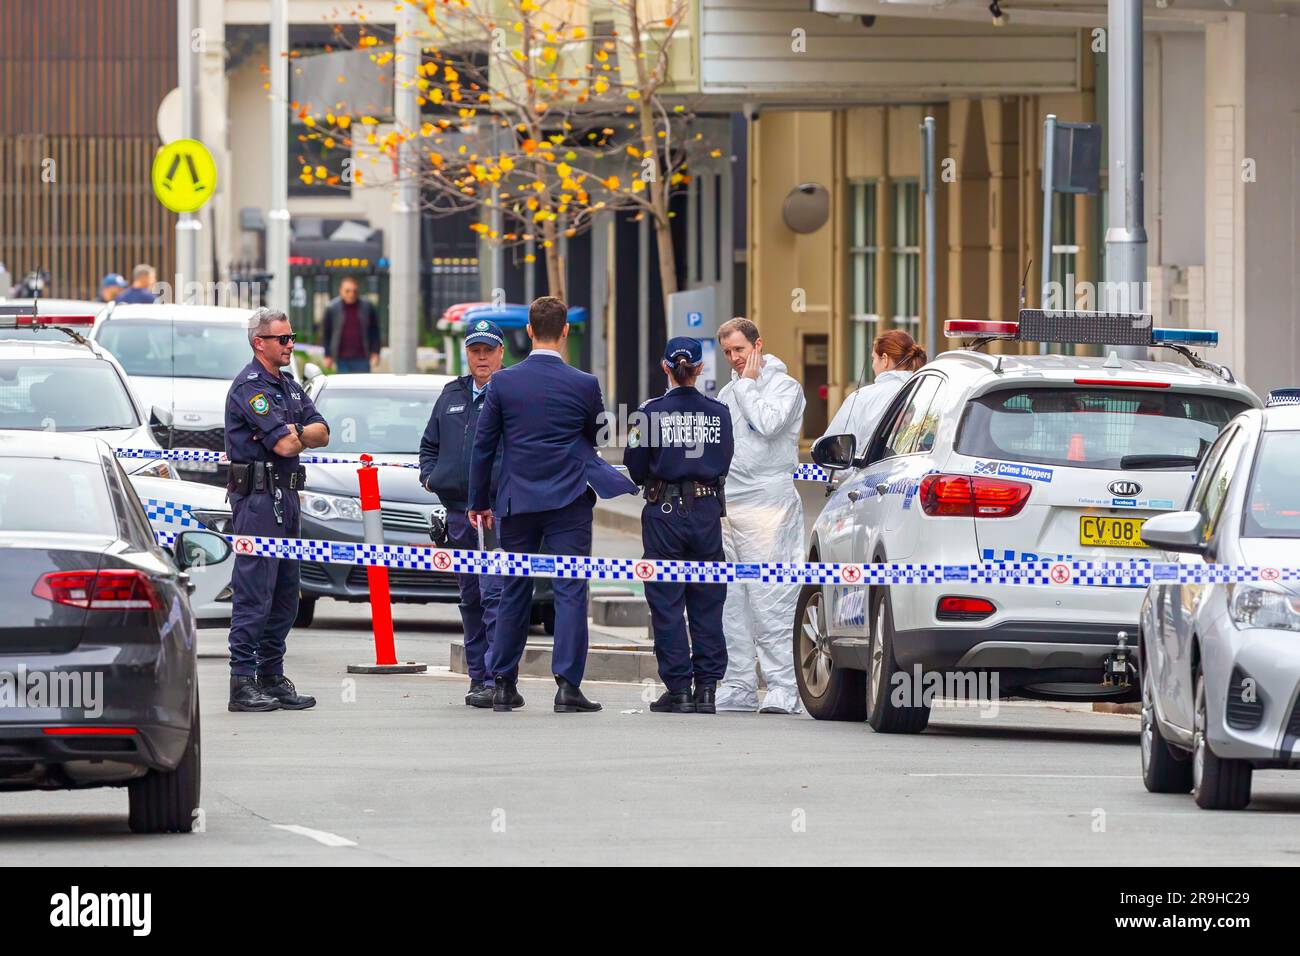 Sydney, Australia. 27 Jun 2023. Alen Moradian, an alleged underworld figure with suspected links to outlaw motorcycle gangs, has been shot and killed in his car. The deadly shooting occurred in the basement car park of Moradian's residence in Spring Street, Bondi Junction. He was sitting in his luxury automobile at the time of his death. Police are treating the crime as a targeted assassination. Pictured: police on Spring Street, cordoned off while investigations continue. Credit: Robert Wallace / Wallace Media Network / Alamy Live News Stock Photo